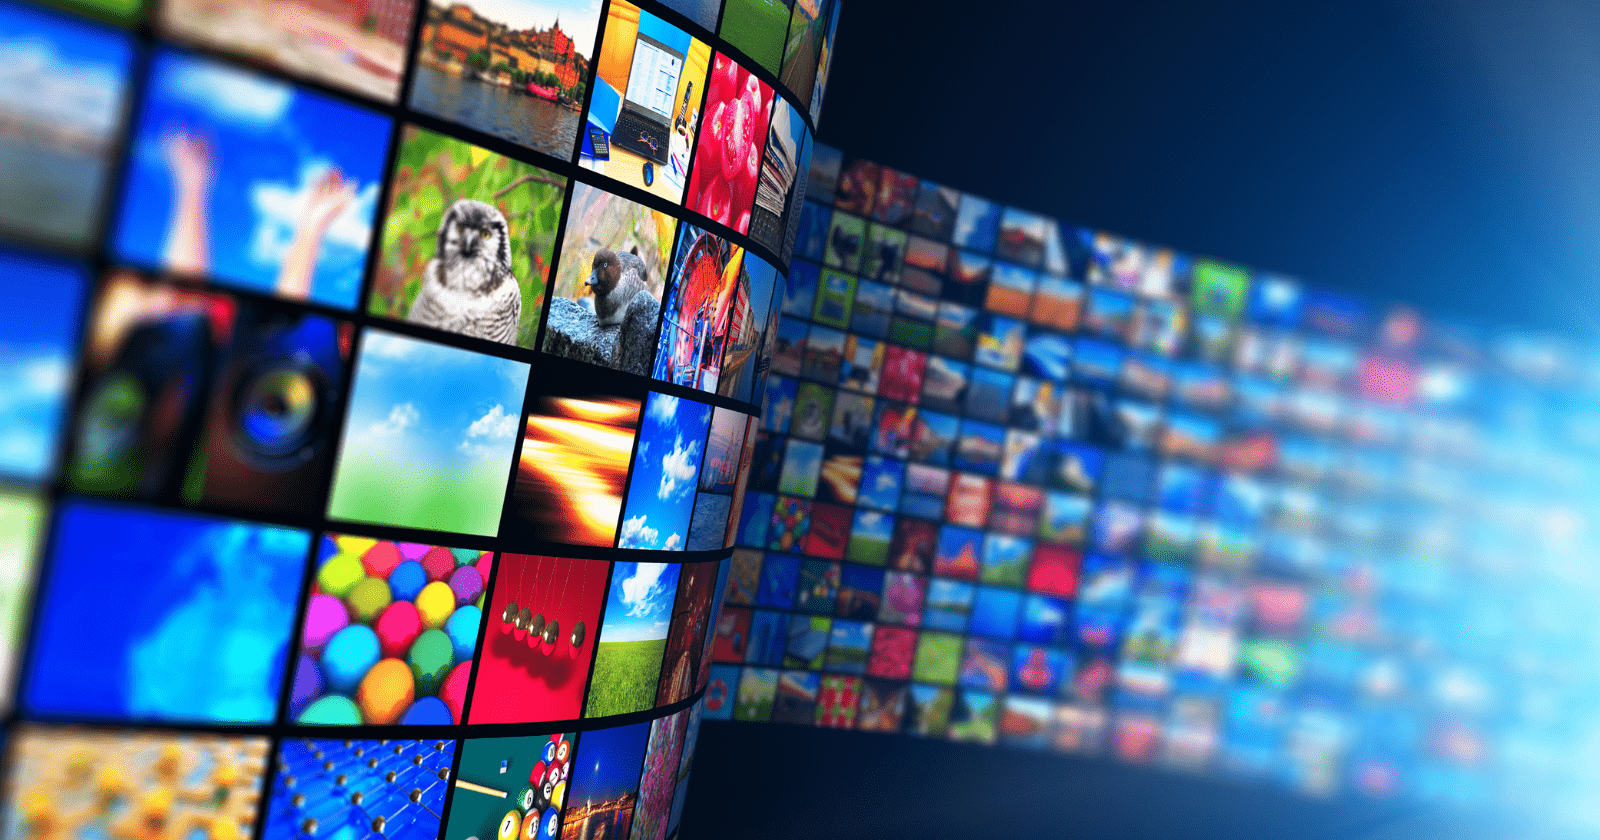 Who Are The Best Online Video Platform Providers in 2020?